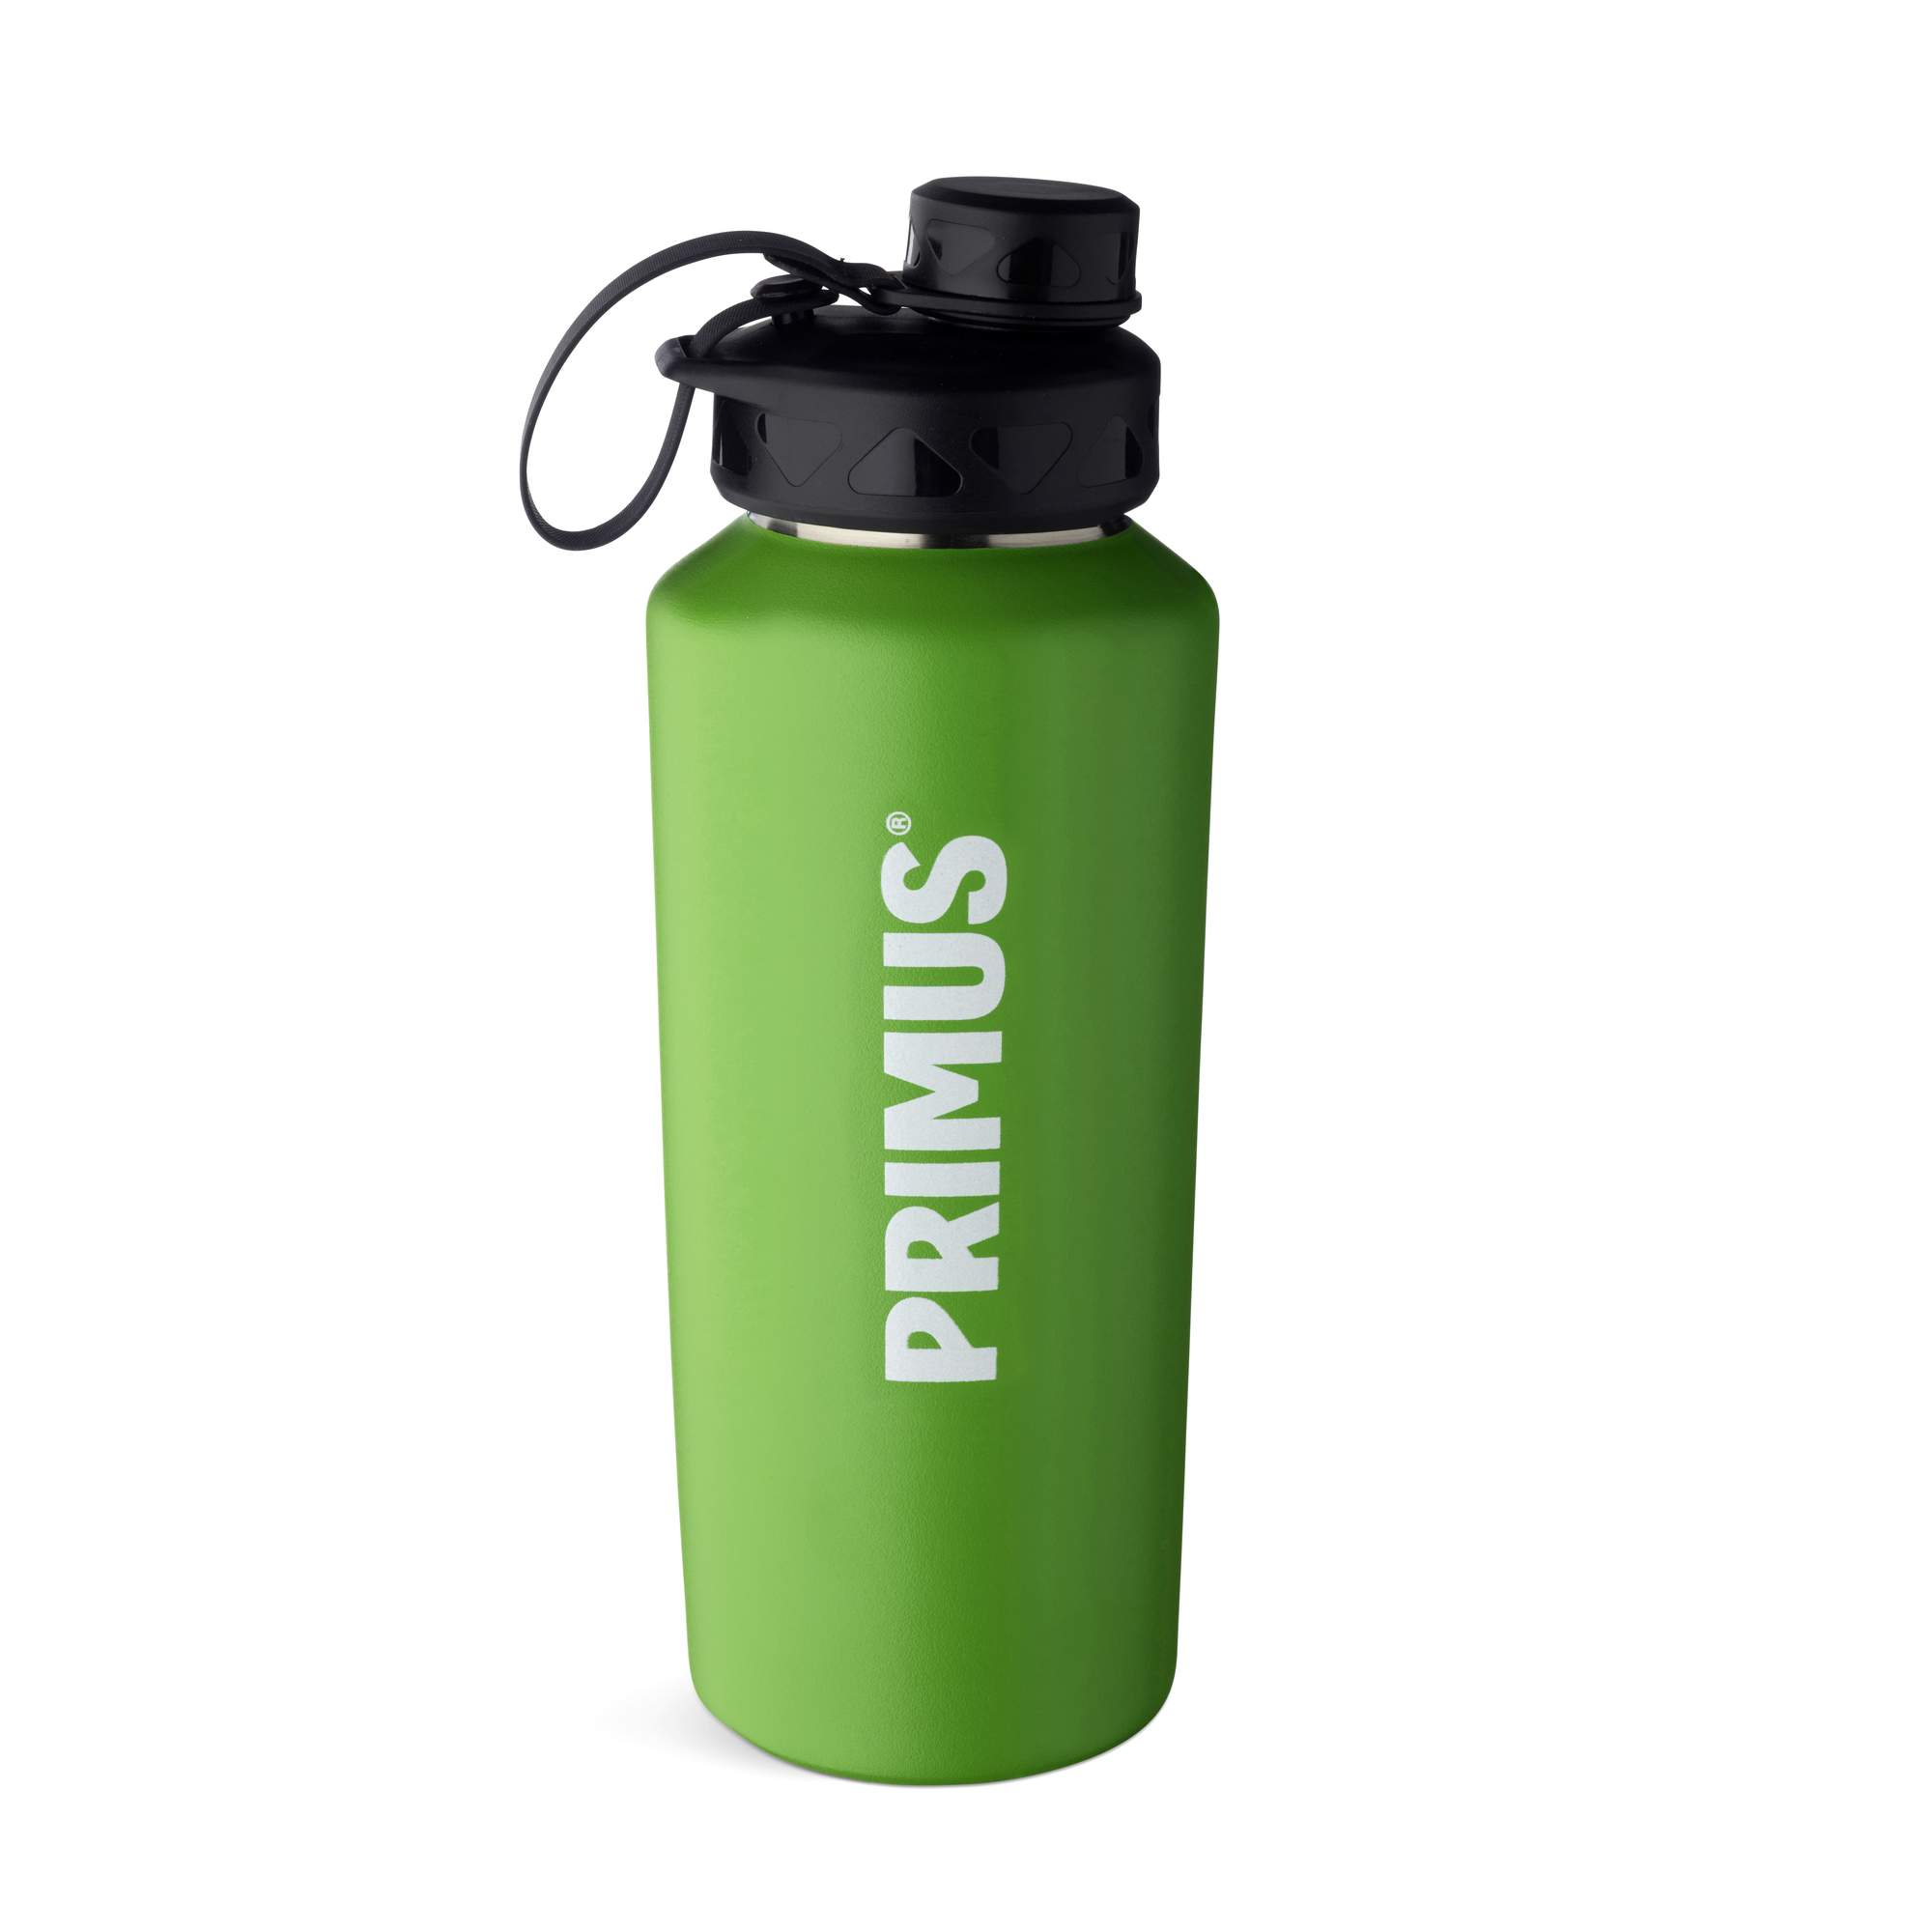 Primus Trailbottle Stainless Steel 1l Moss